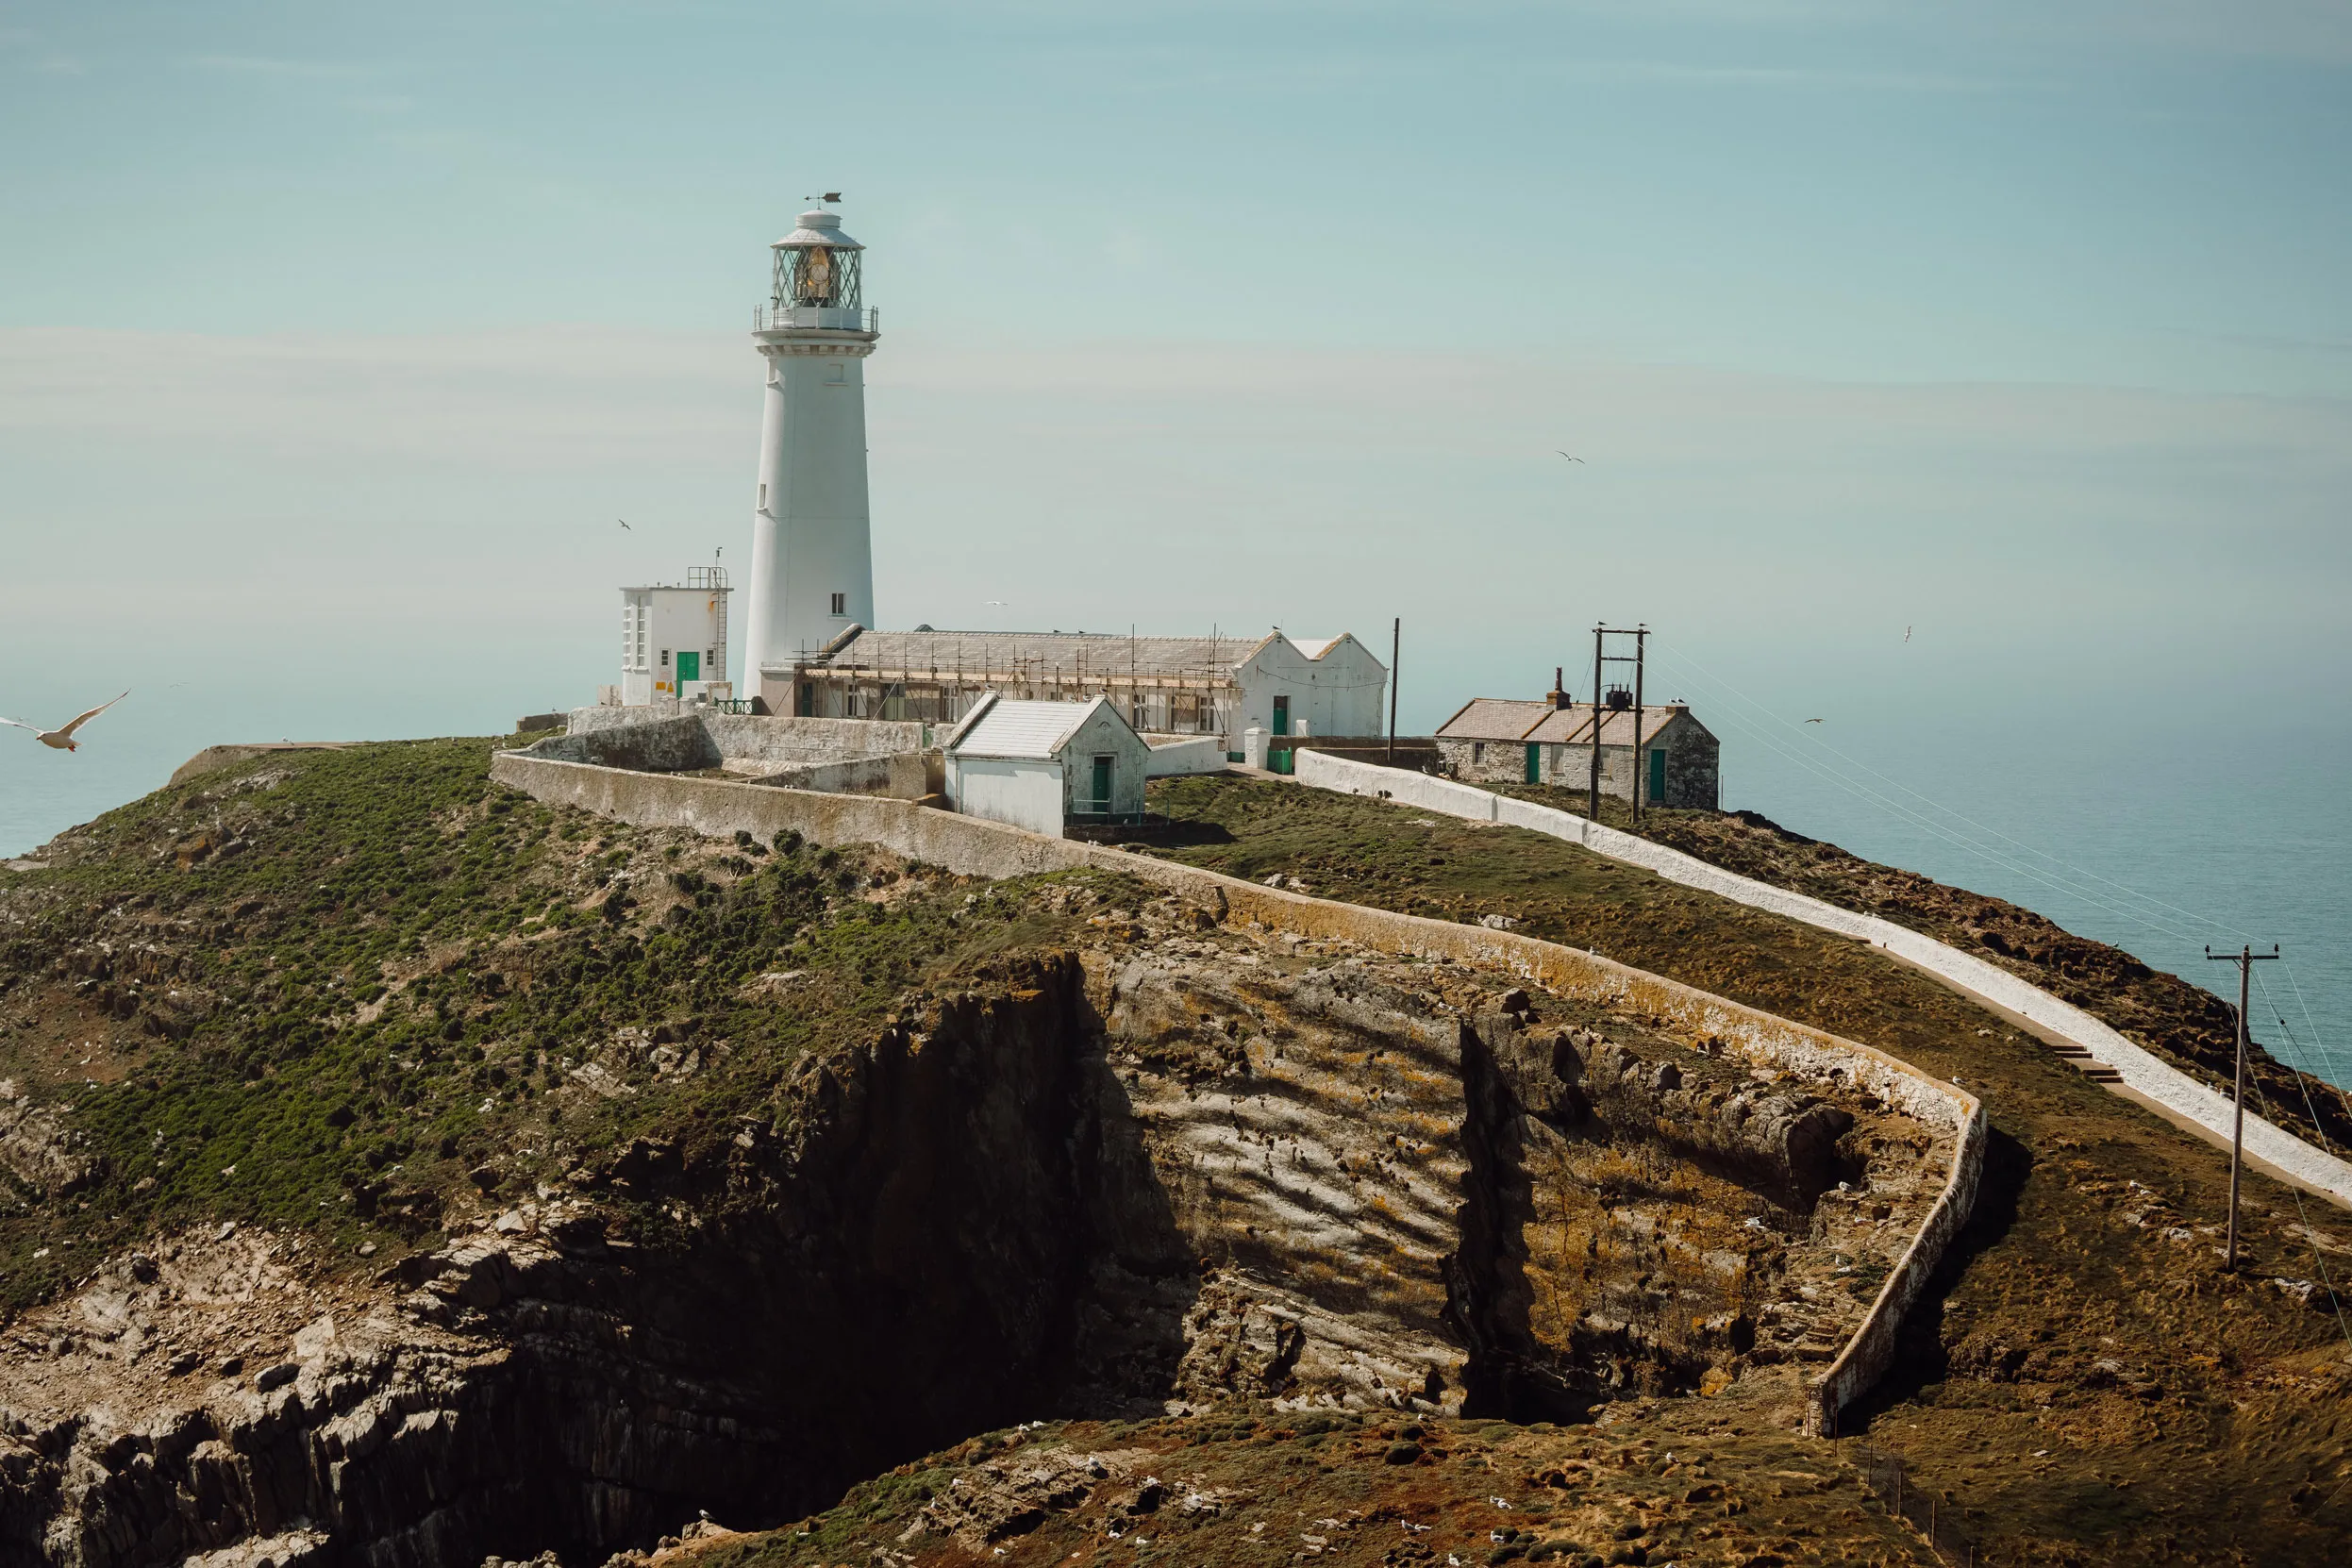 South Stack lighthouse against a blue ocean.